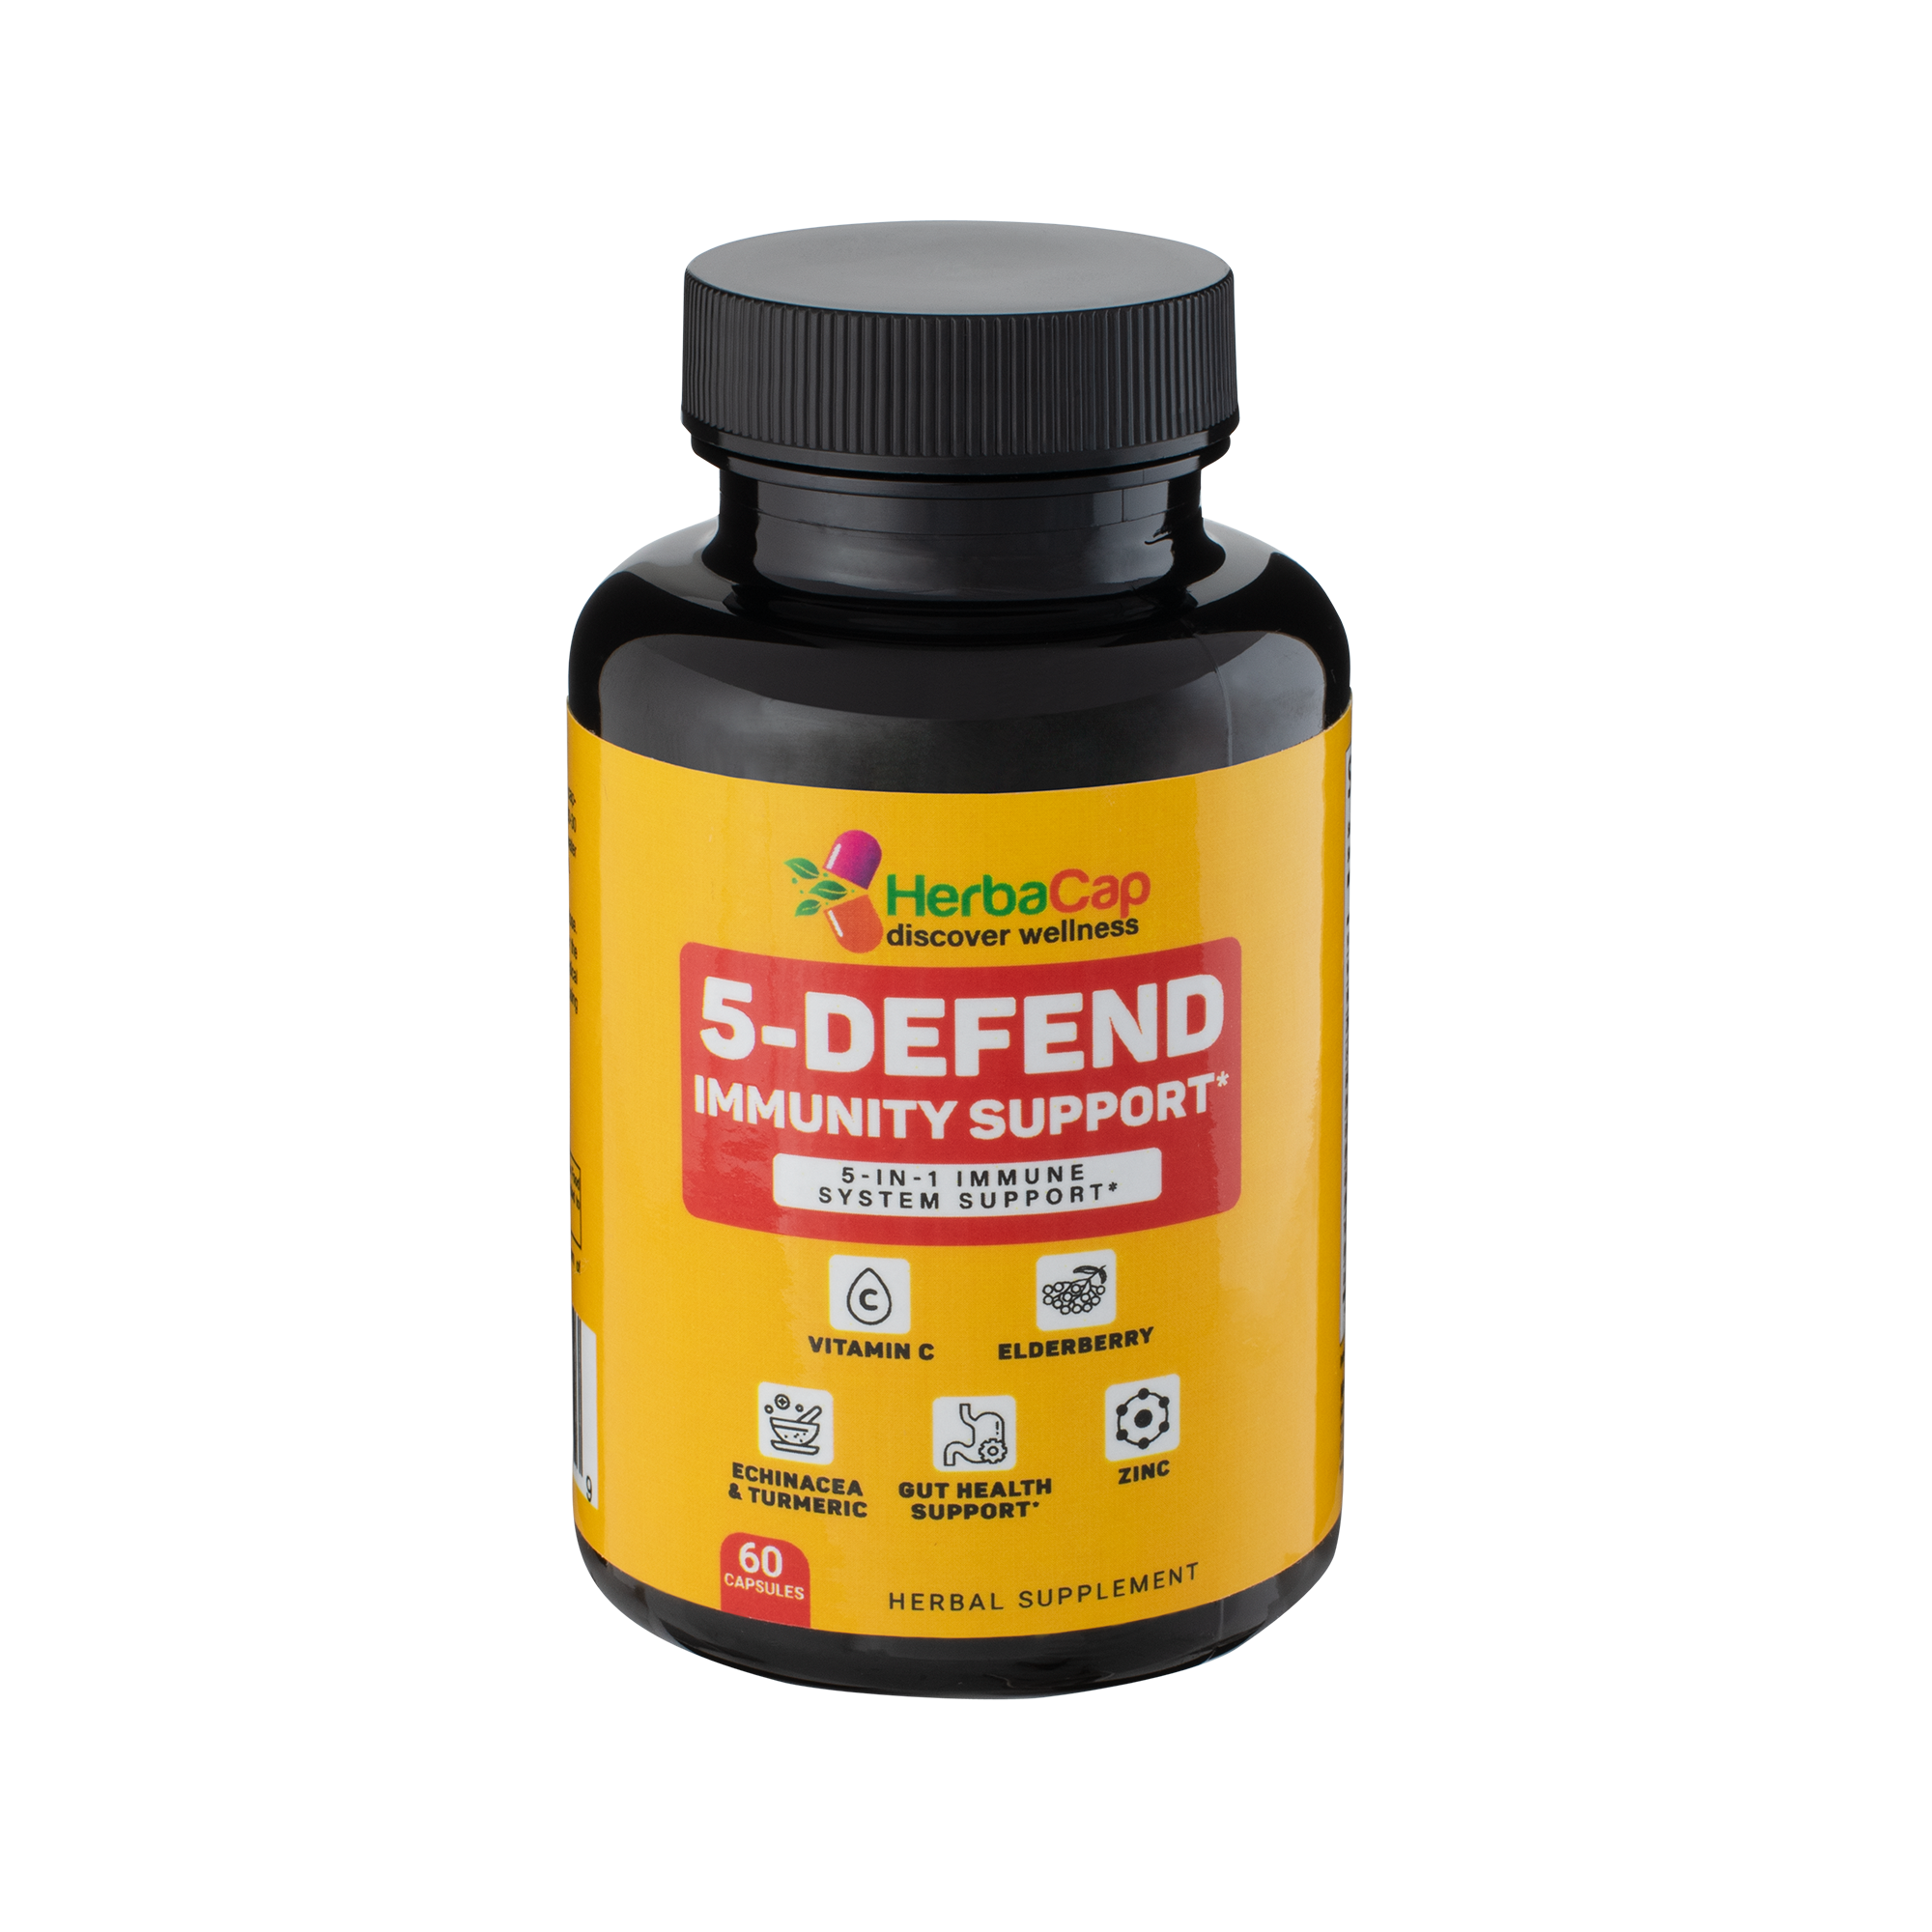 5-Defend Immunity Support